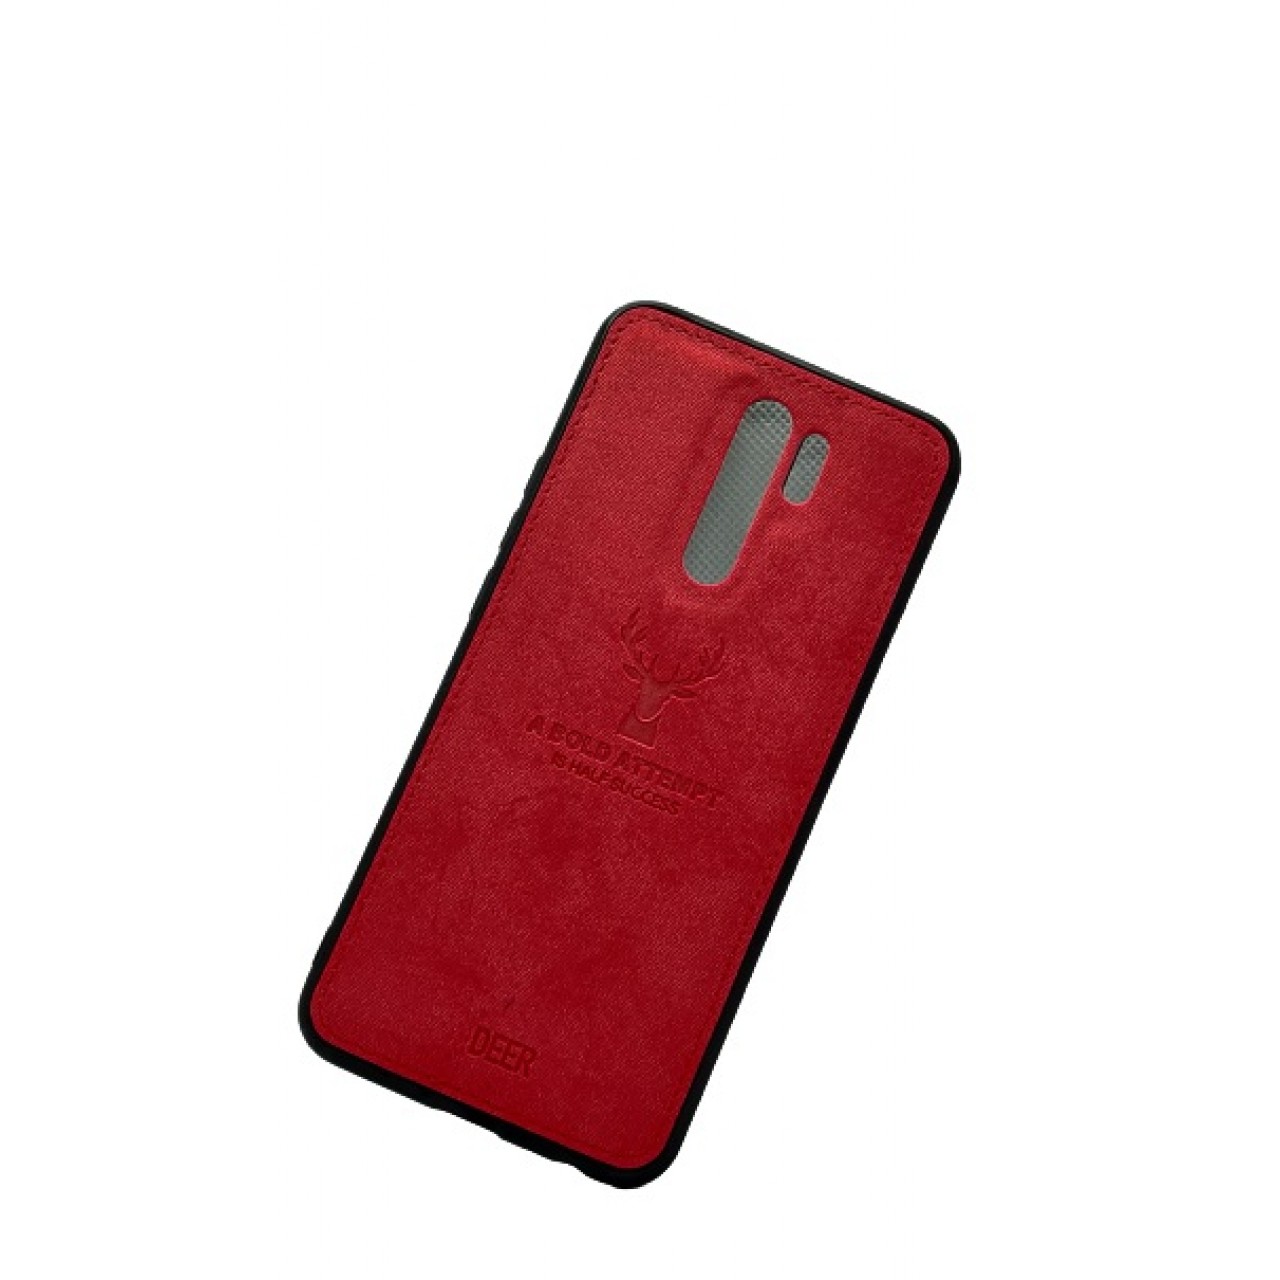 DEER CLOTH BACK CASE FOR XIAOMI REDMI 9 - RED